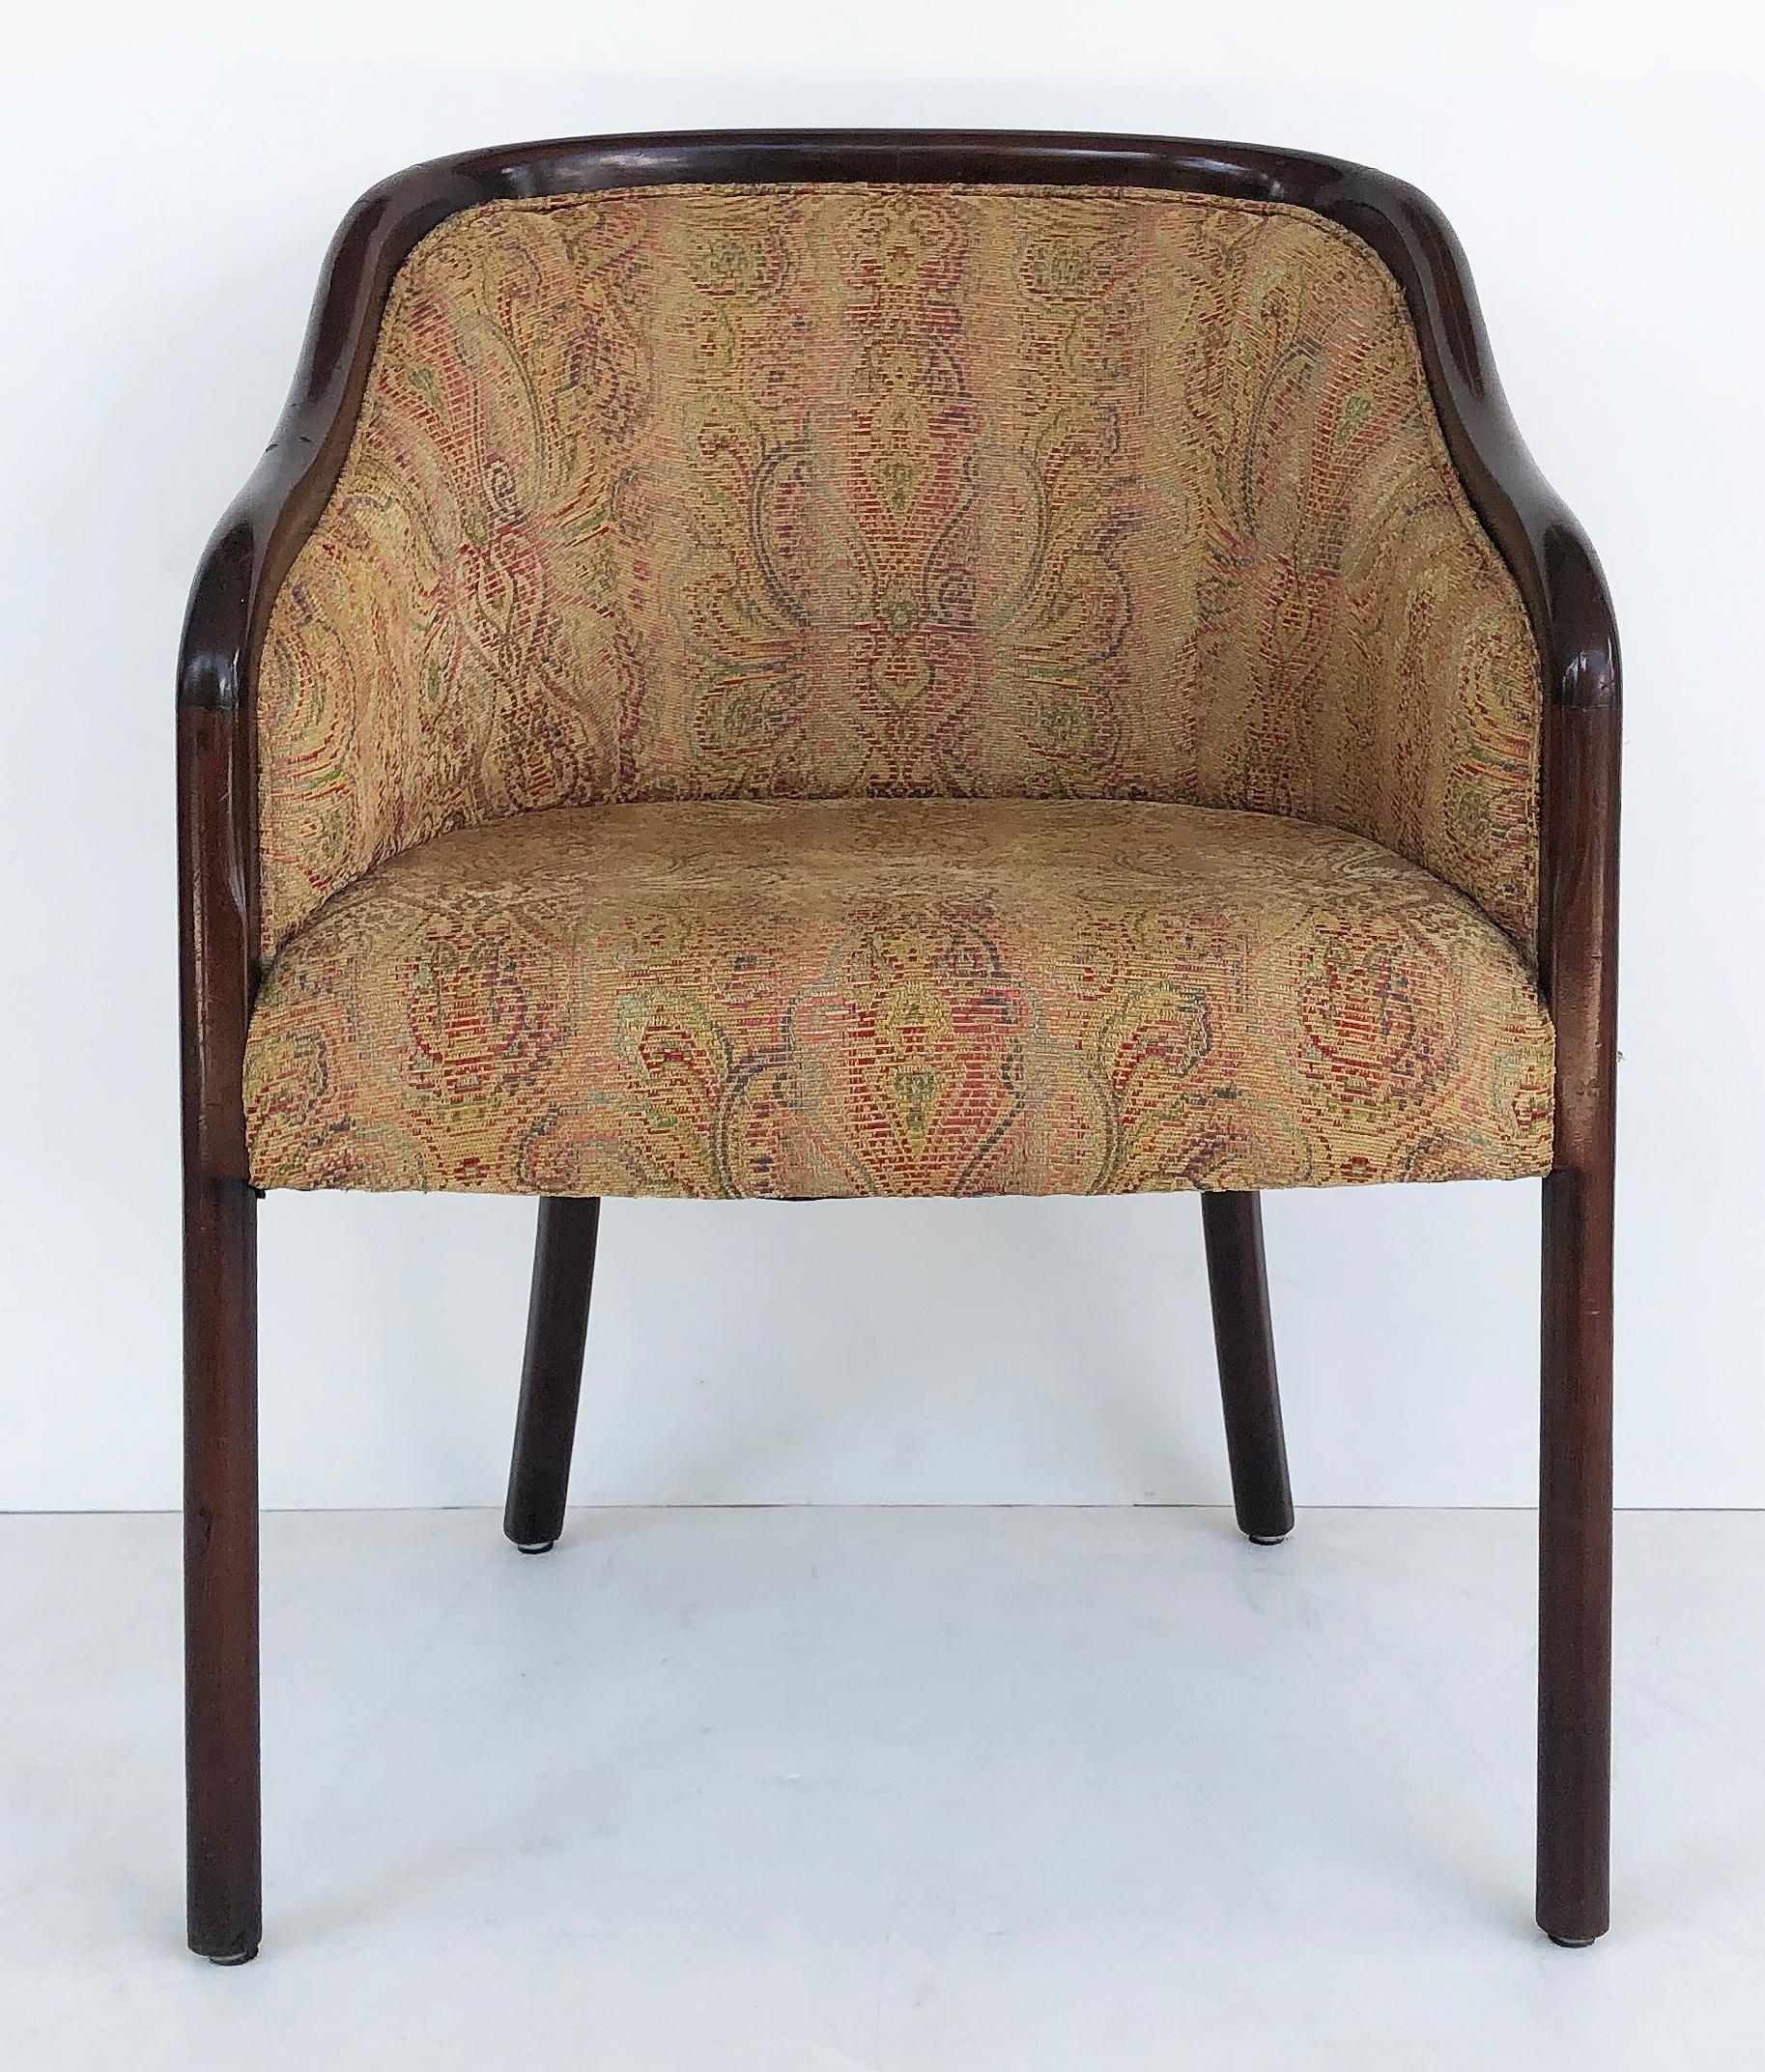 Vintage Ward Bennett brickell barrel back chairs, upholstered pair

Offered for sale is a pair of Ward Bennett Brickell upholstered barrel back chairs. The pair has conical back splayed legs and the original upholstery which is still in very good